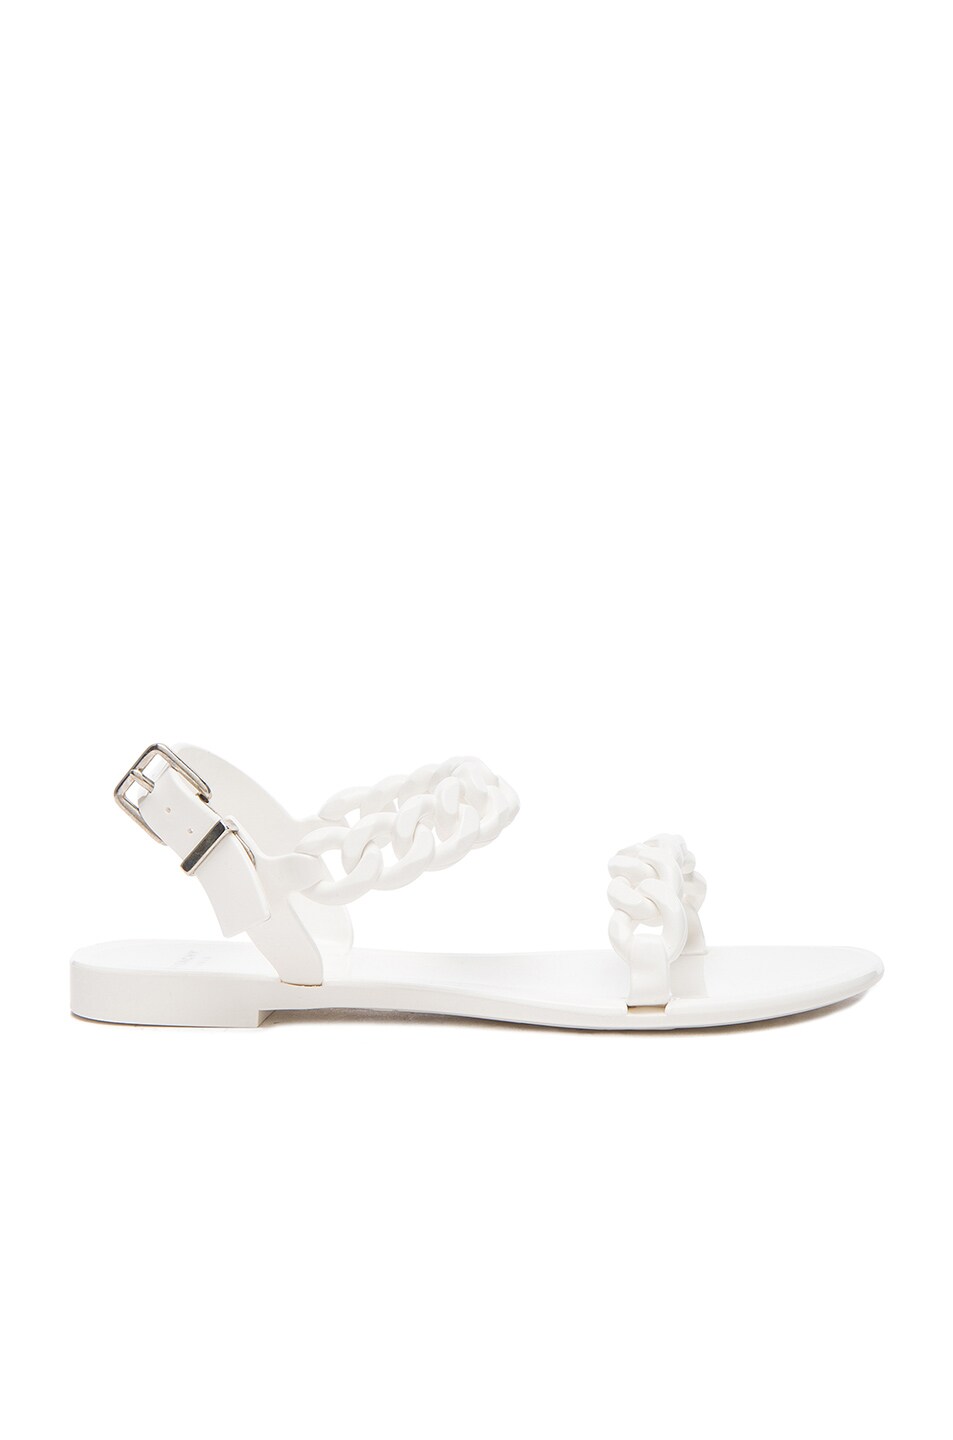 GIVENCHY Jelly Chain Link Flat Sandal